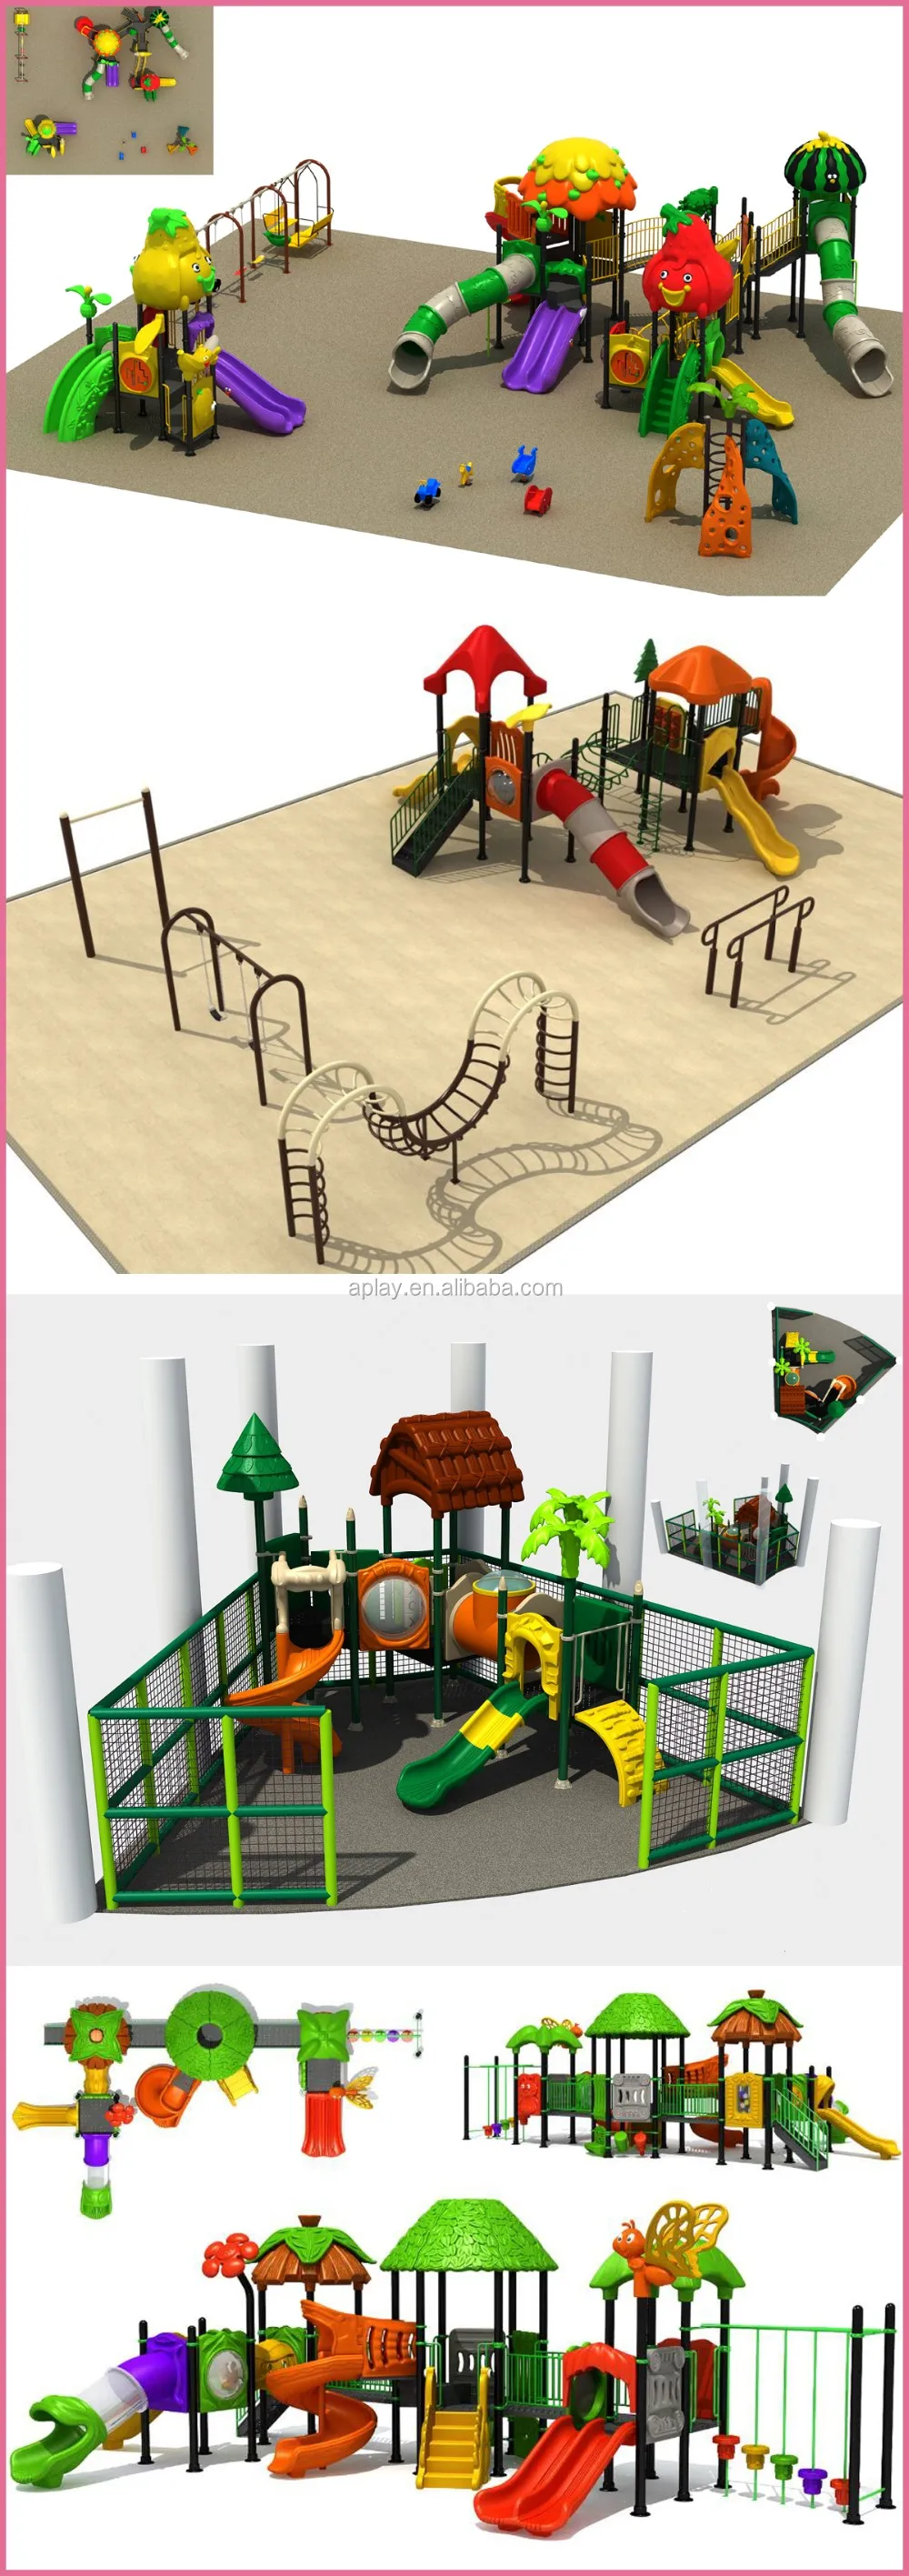 Residential outdoor playground equipment for small school kids outside game slide playing gym structure.jpg